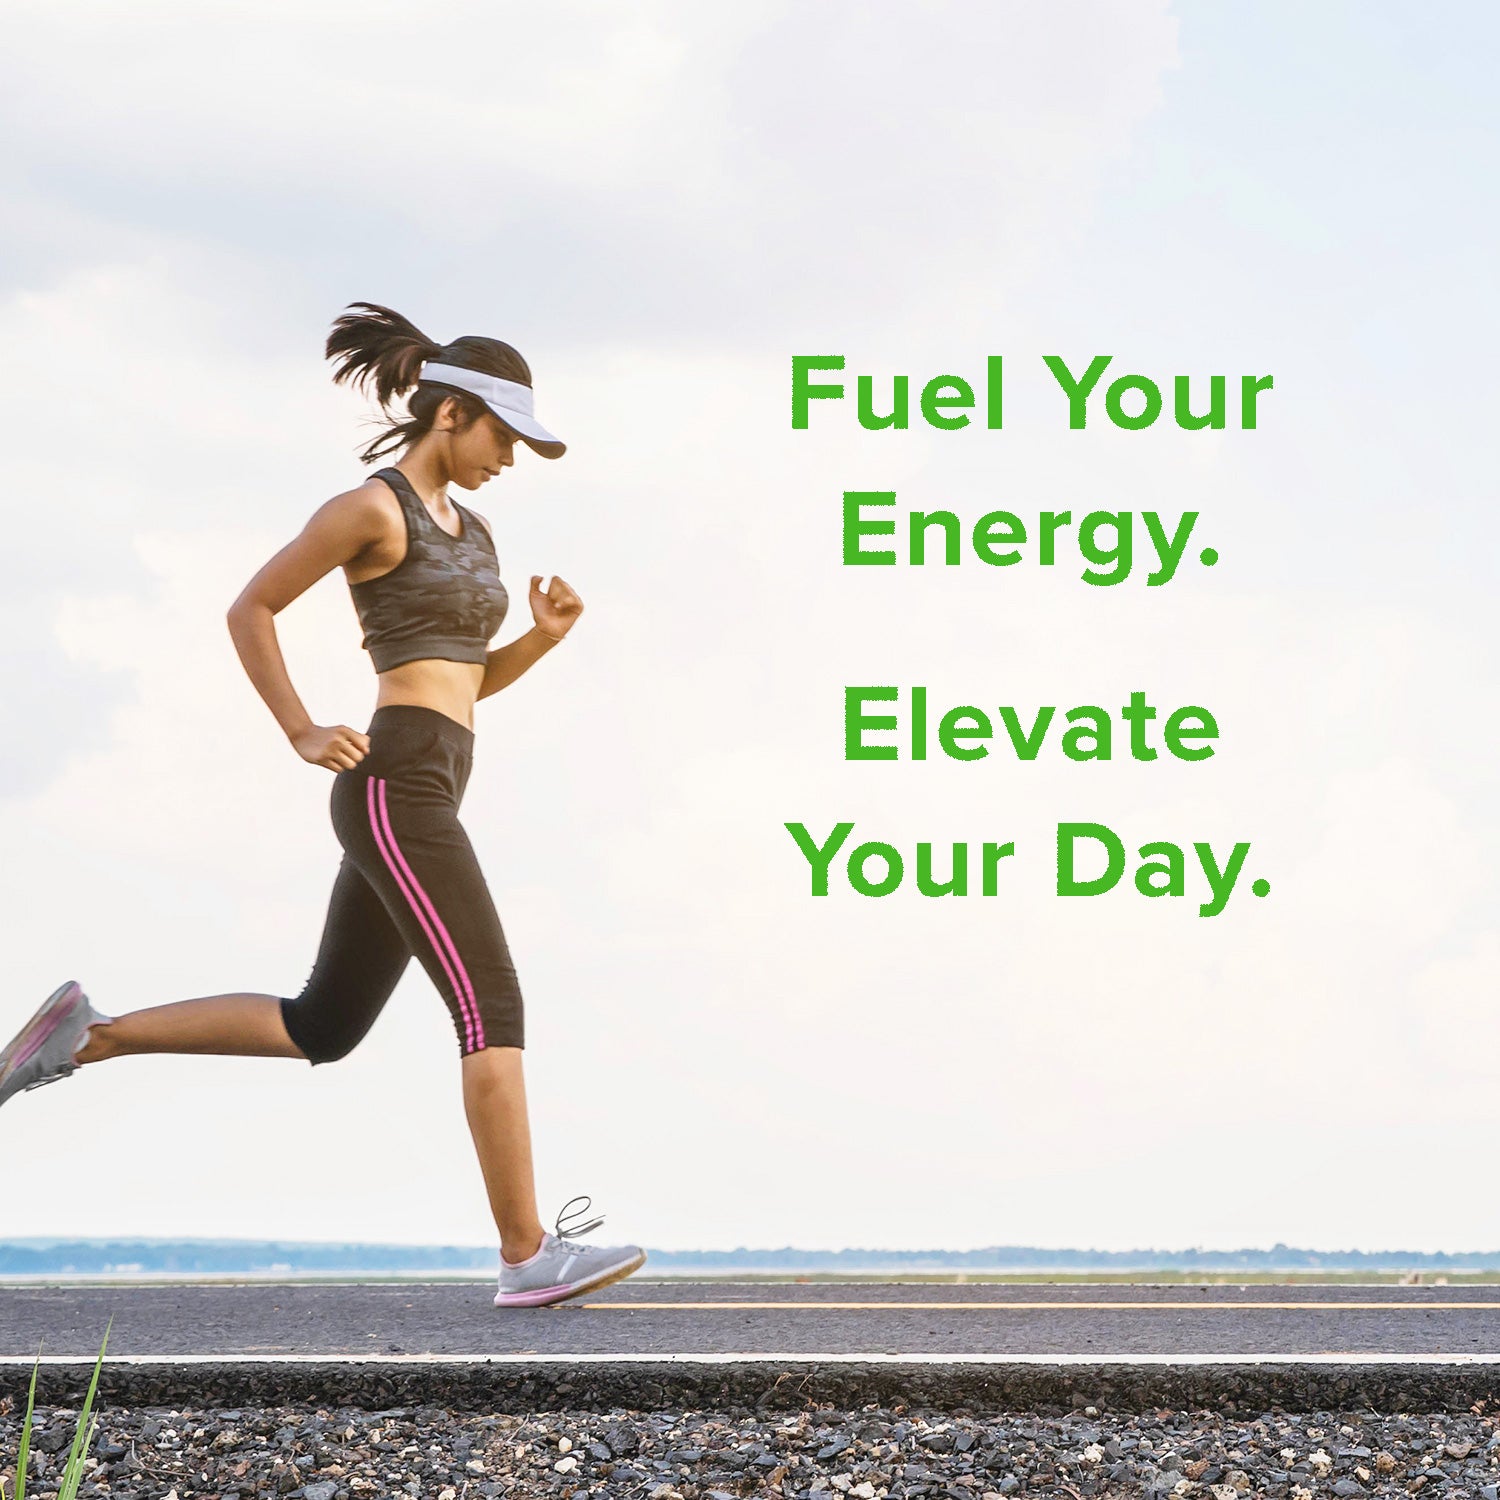 Matcha Collagen Peptides help to fuel your energy and elevate your day.